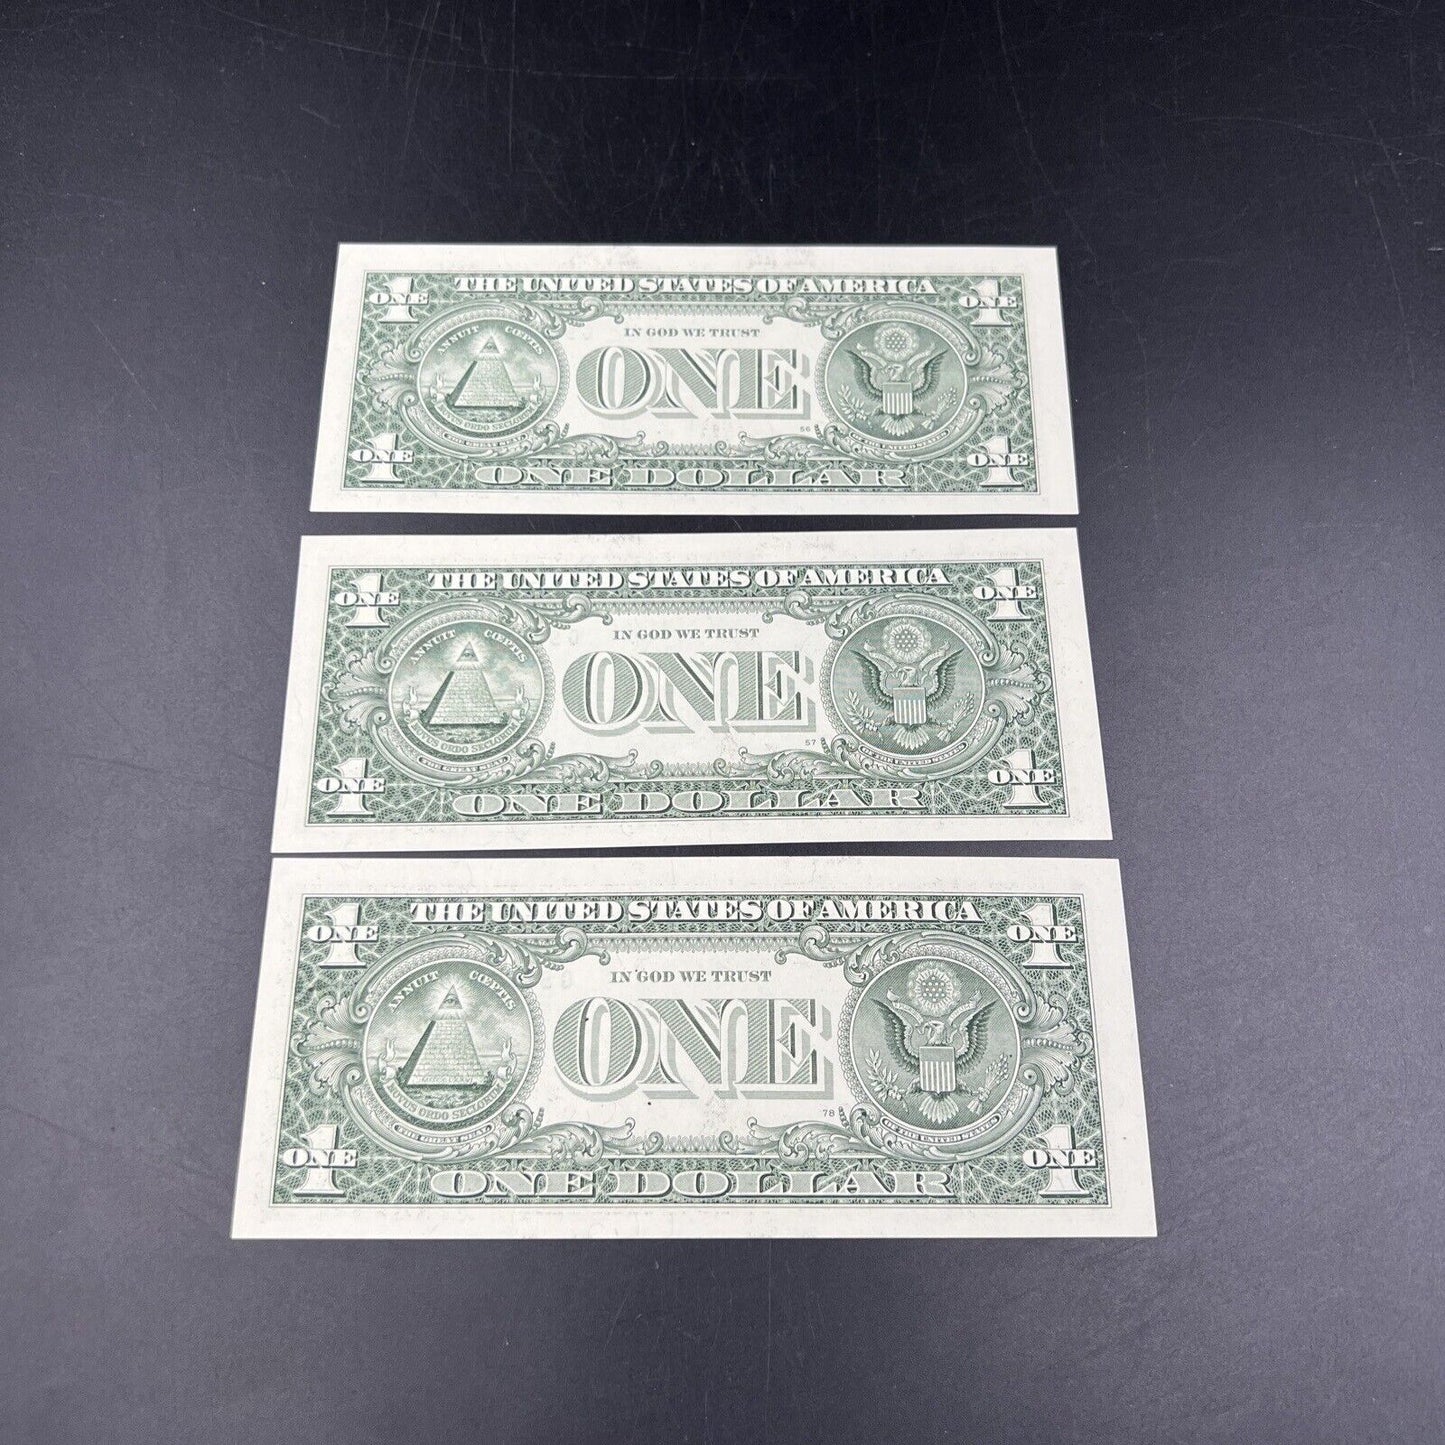 Lot of 3 Consecutive 2009 $1 FRN One Dollar Federal Reserve Notes Choice UNC